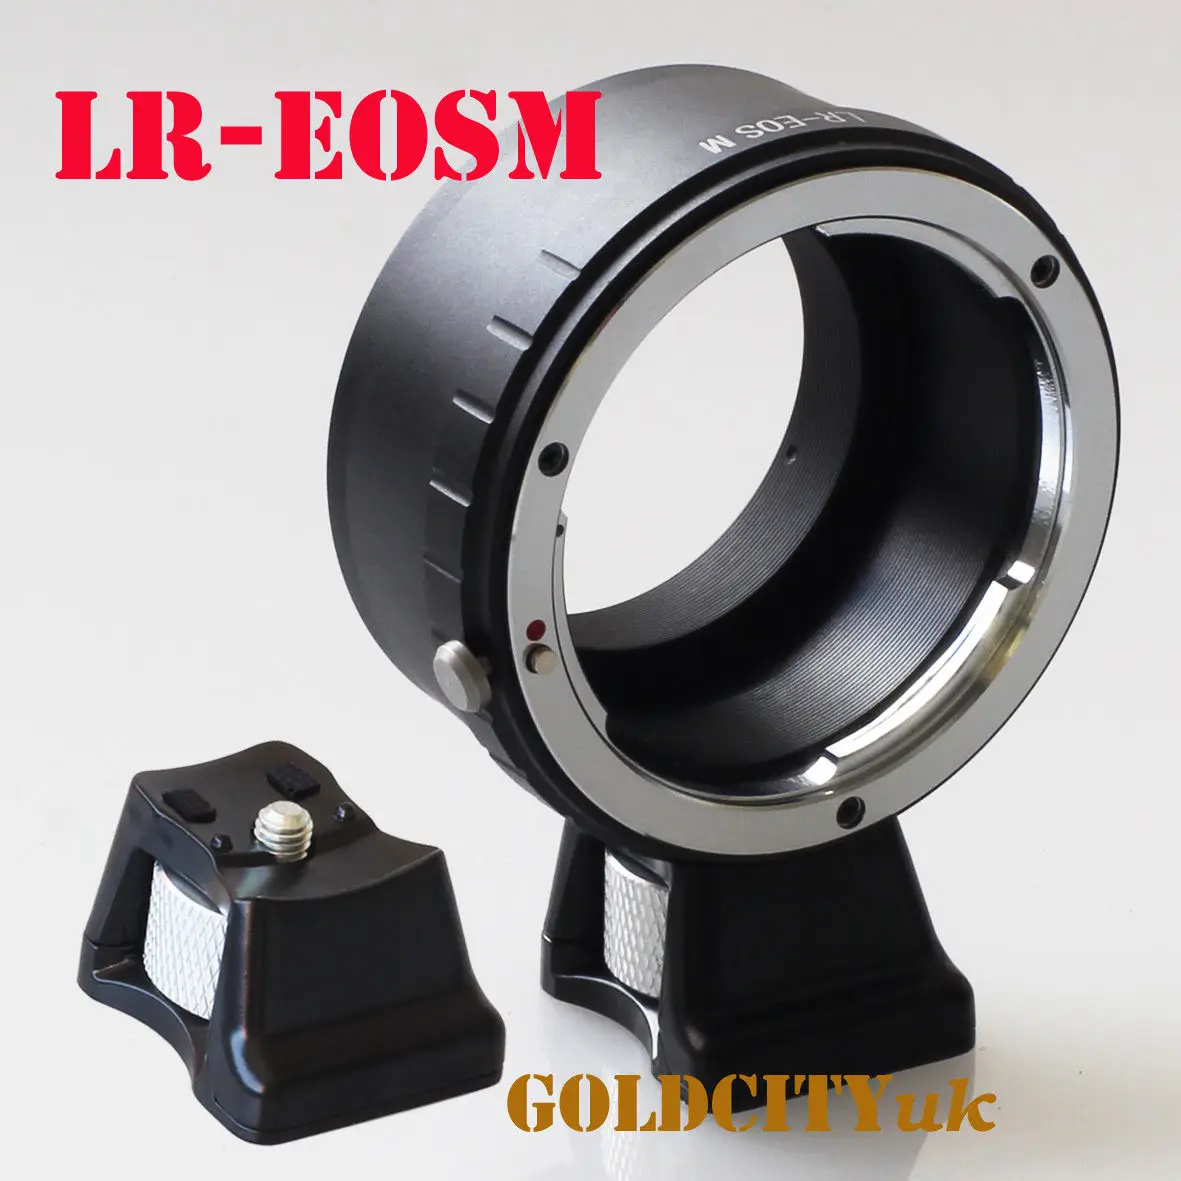 

LR-EOSM adapter ring with tripod for leica R LR Lens to canon EOSM EF-M eosm/m1/m2/m3/m5/m6/m10/m50/m100 camera body